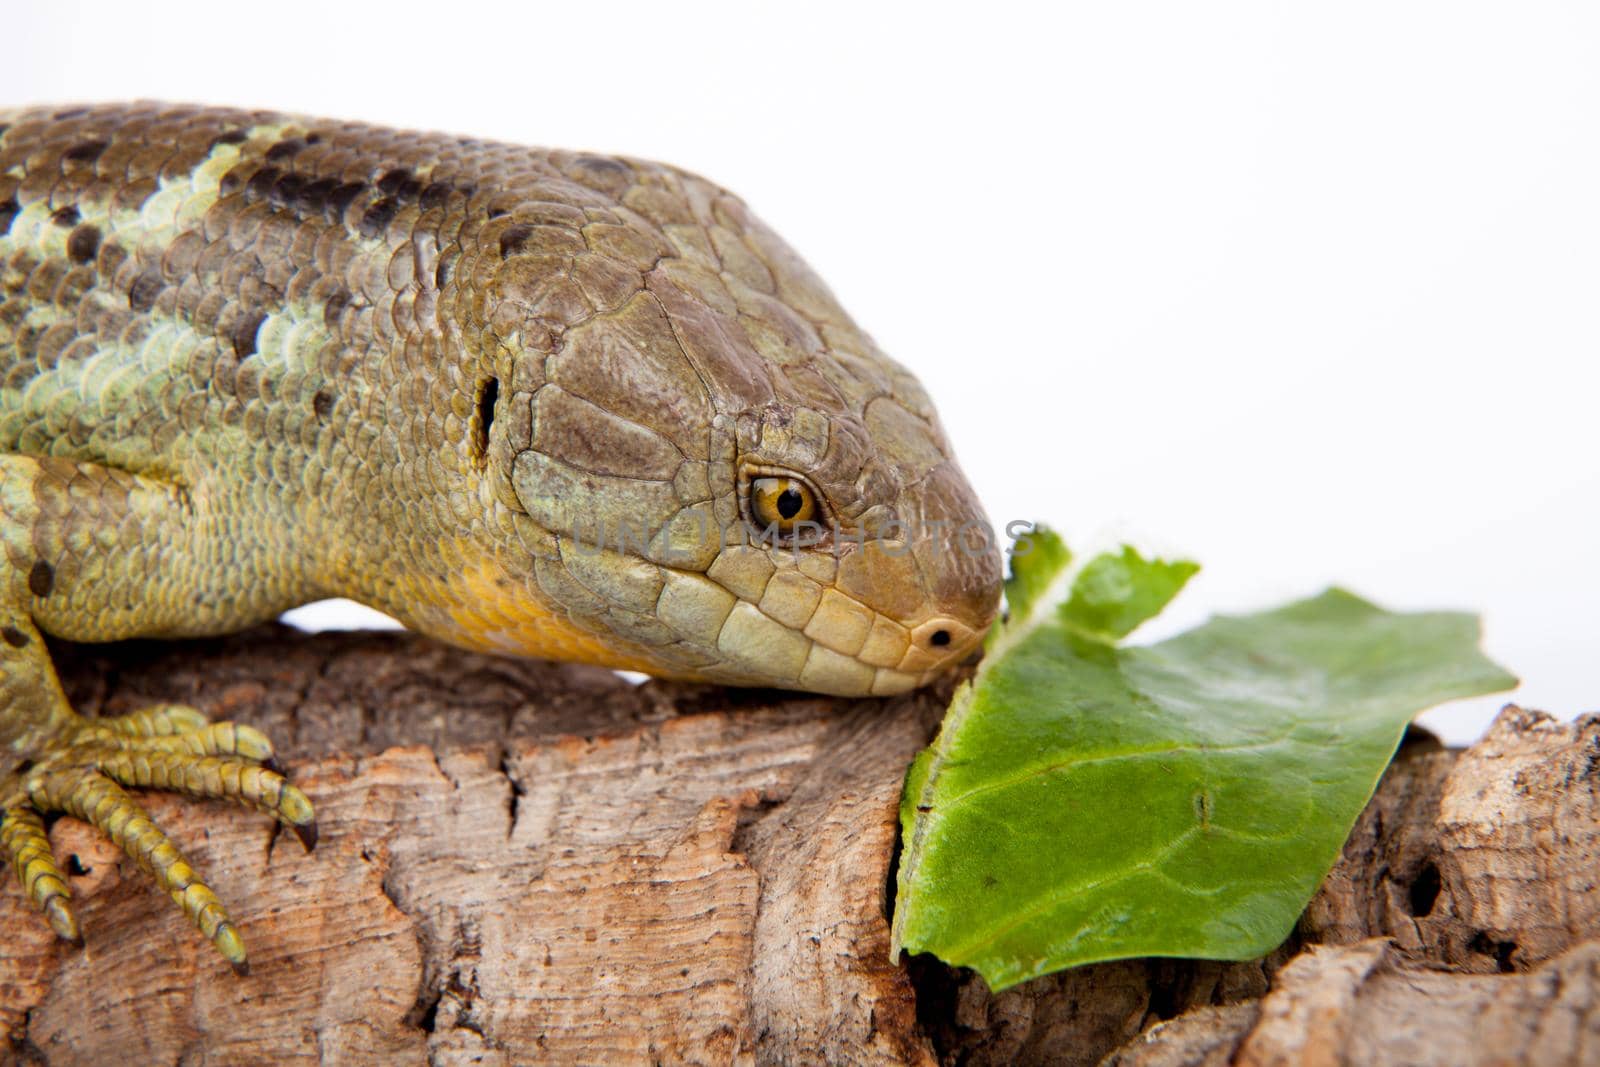 The Solomon Islands skink on white background by RosaJay